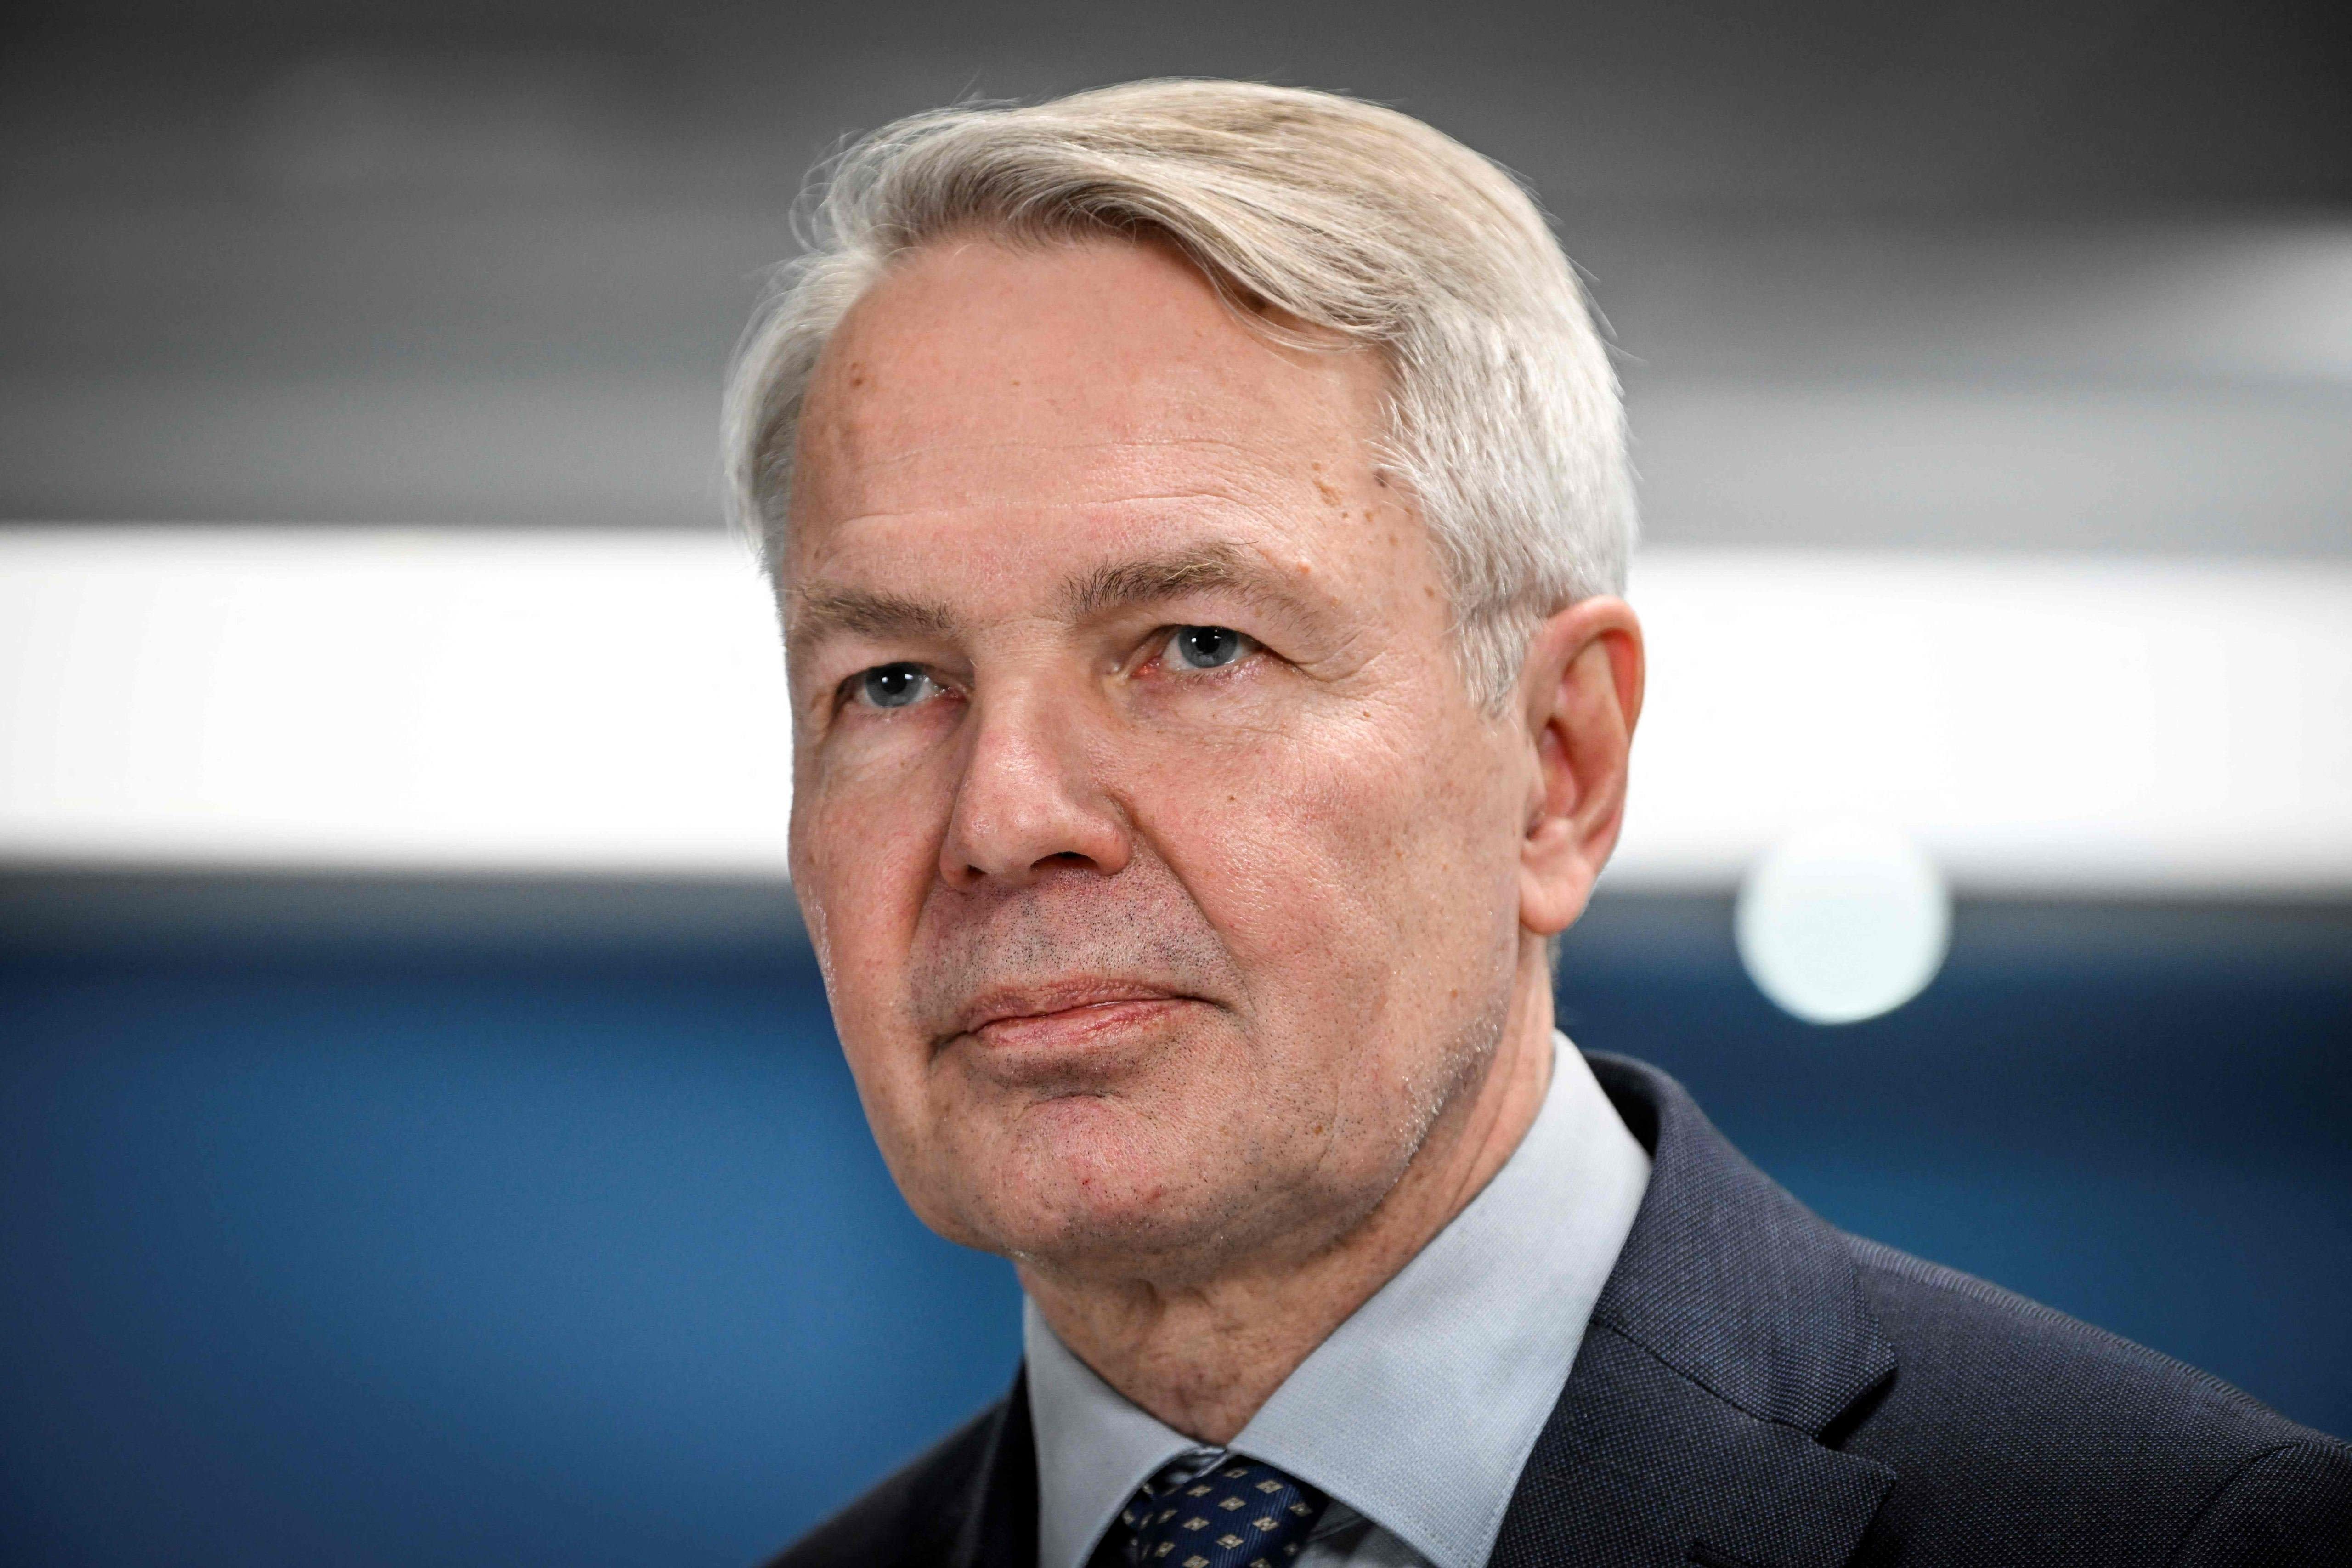 Foreign Minister Haavisto: The EU’s joint response to Russia shows unity